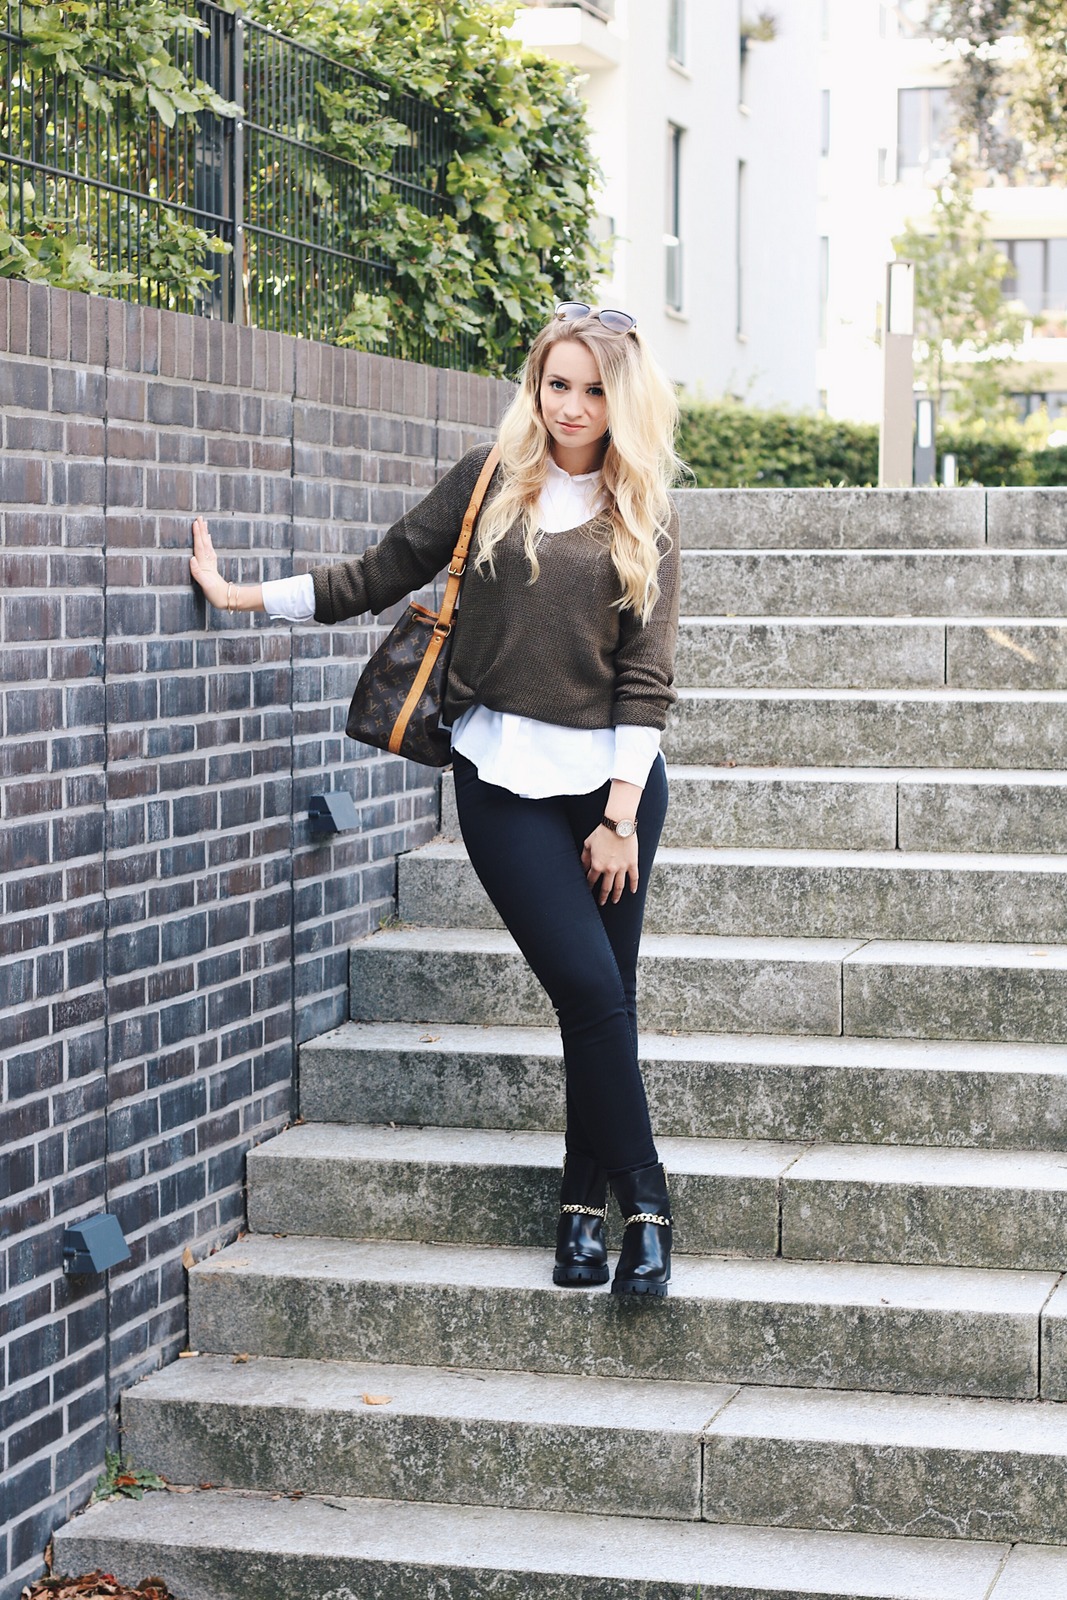 Herbst Trend Lagenlook Outfit Blogger Oliv Sweater Pullover Jeans schwarz Bluse Sac Noe Marc Cain Boots